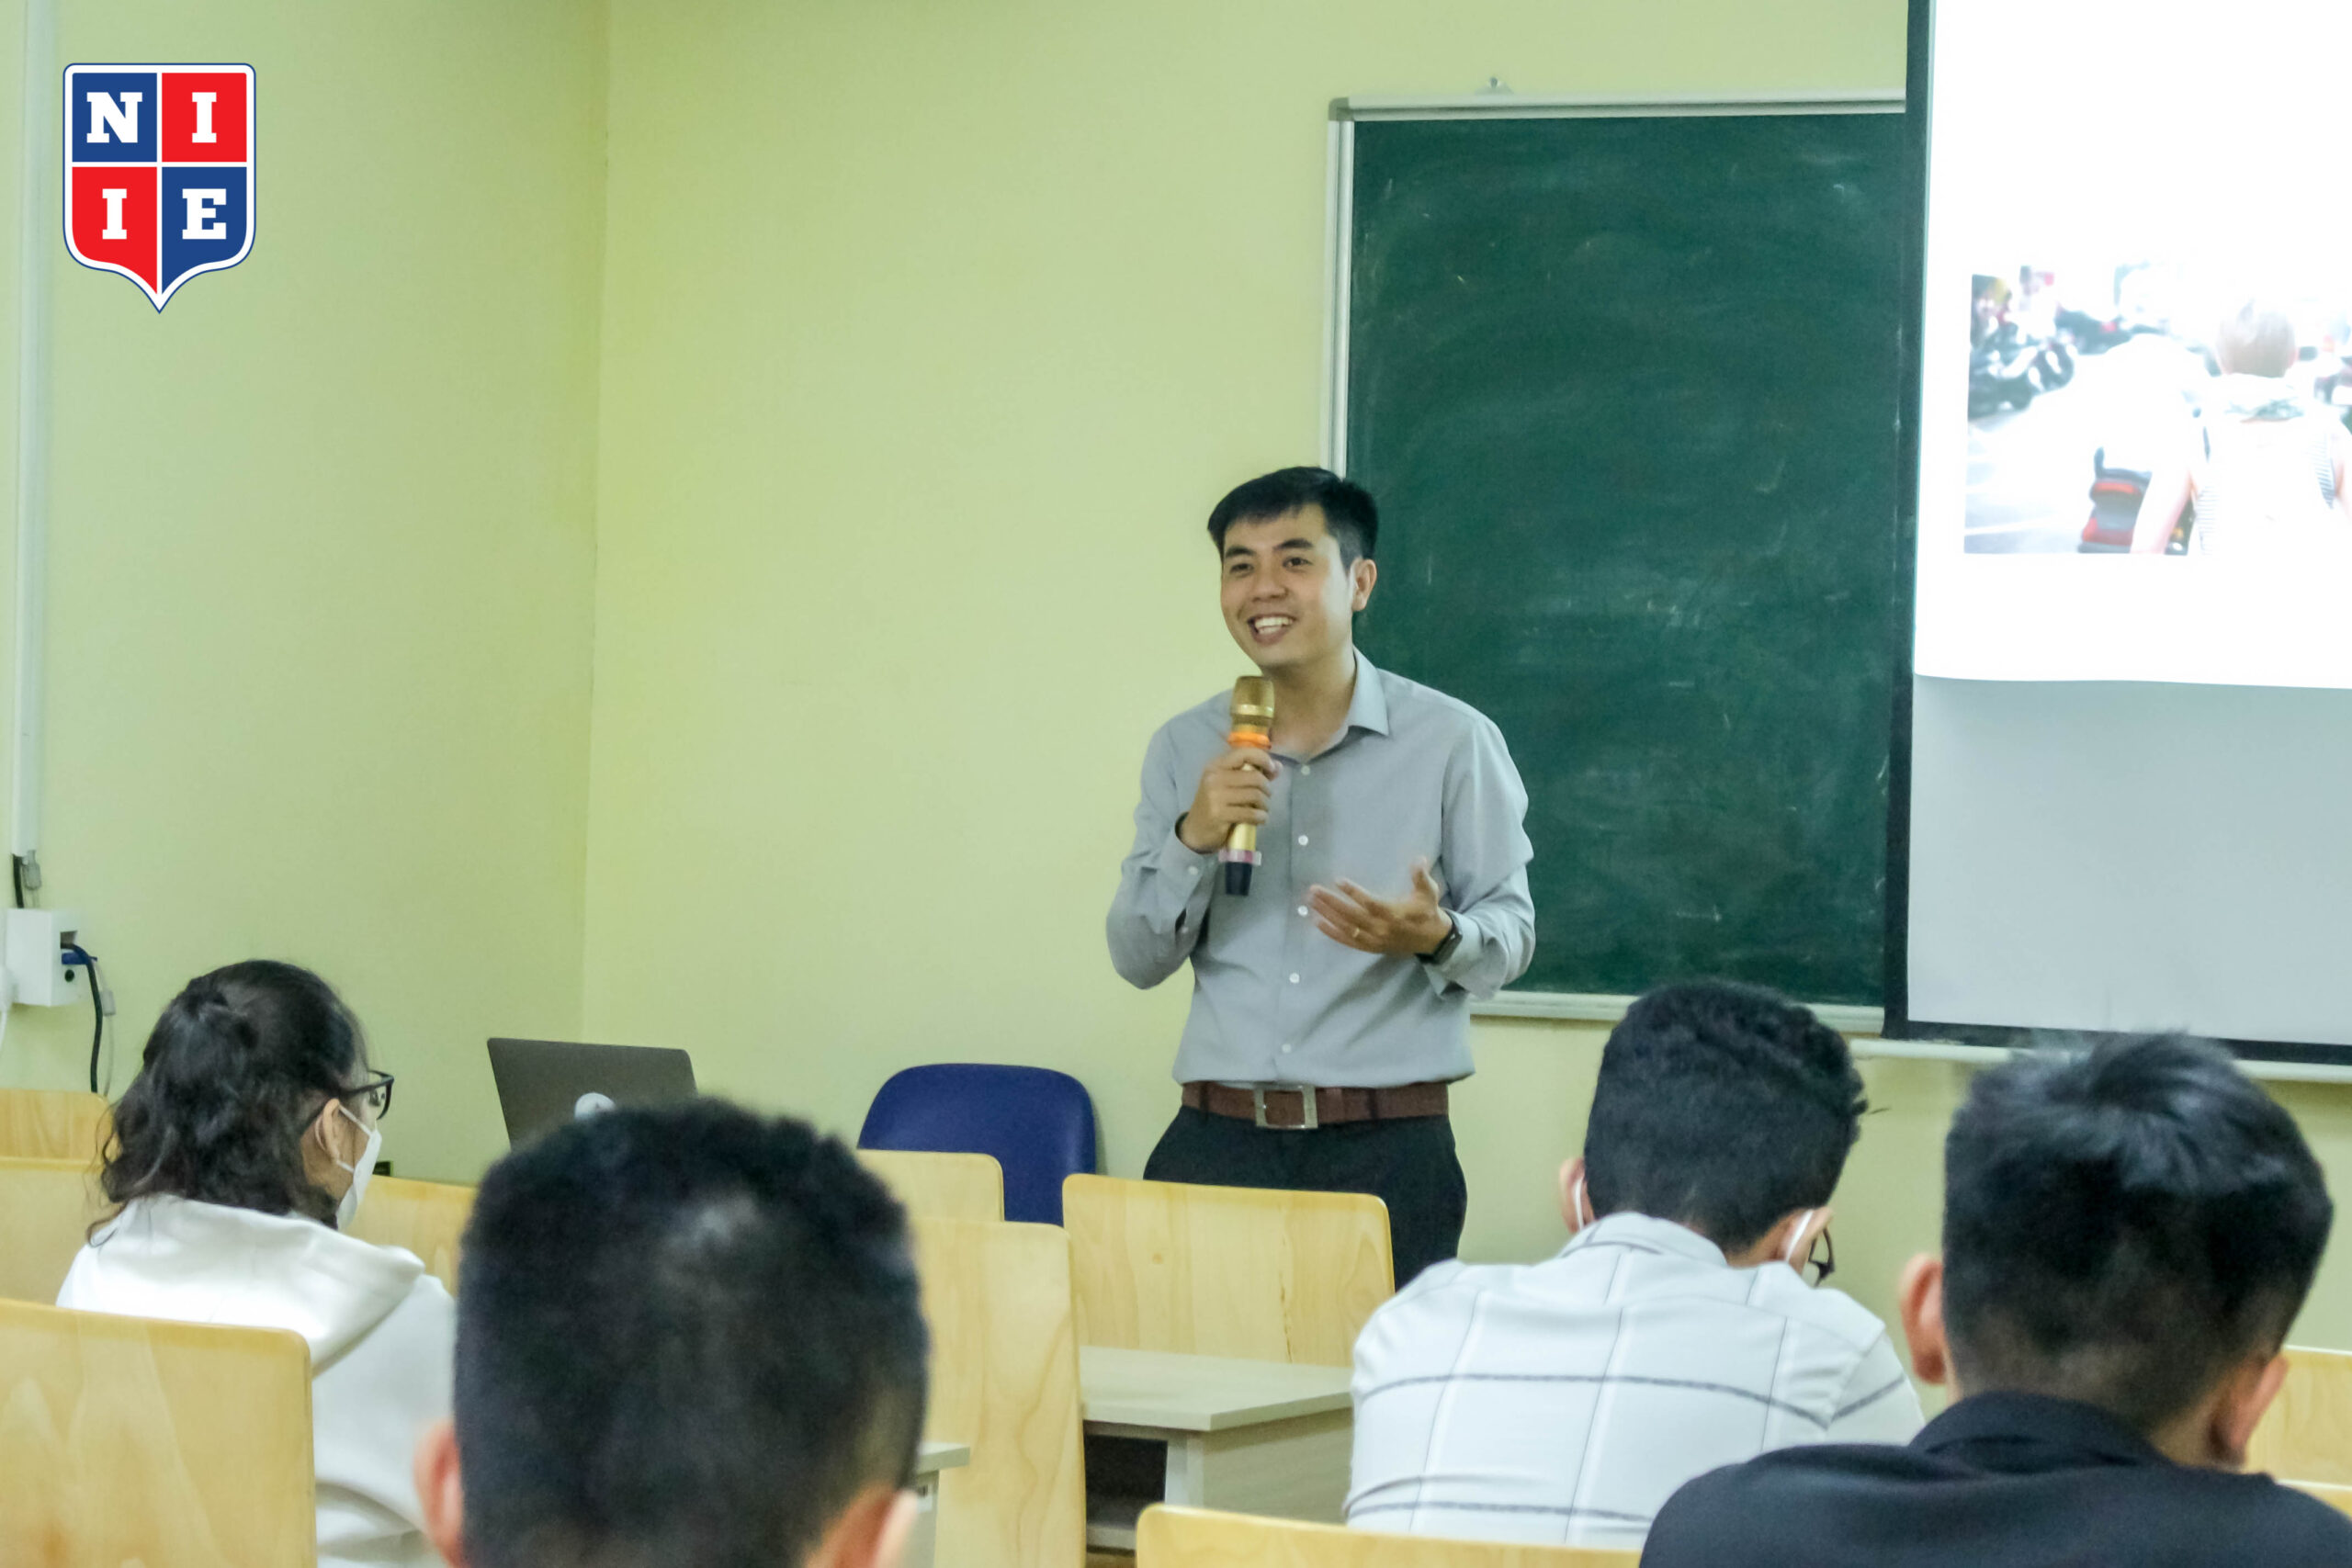 Speaker Doan Xuan Hien is an expert in the field of cybersecurity and network security.